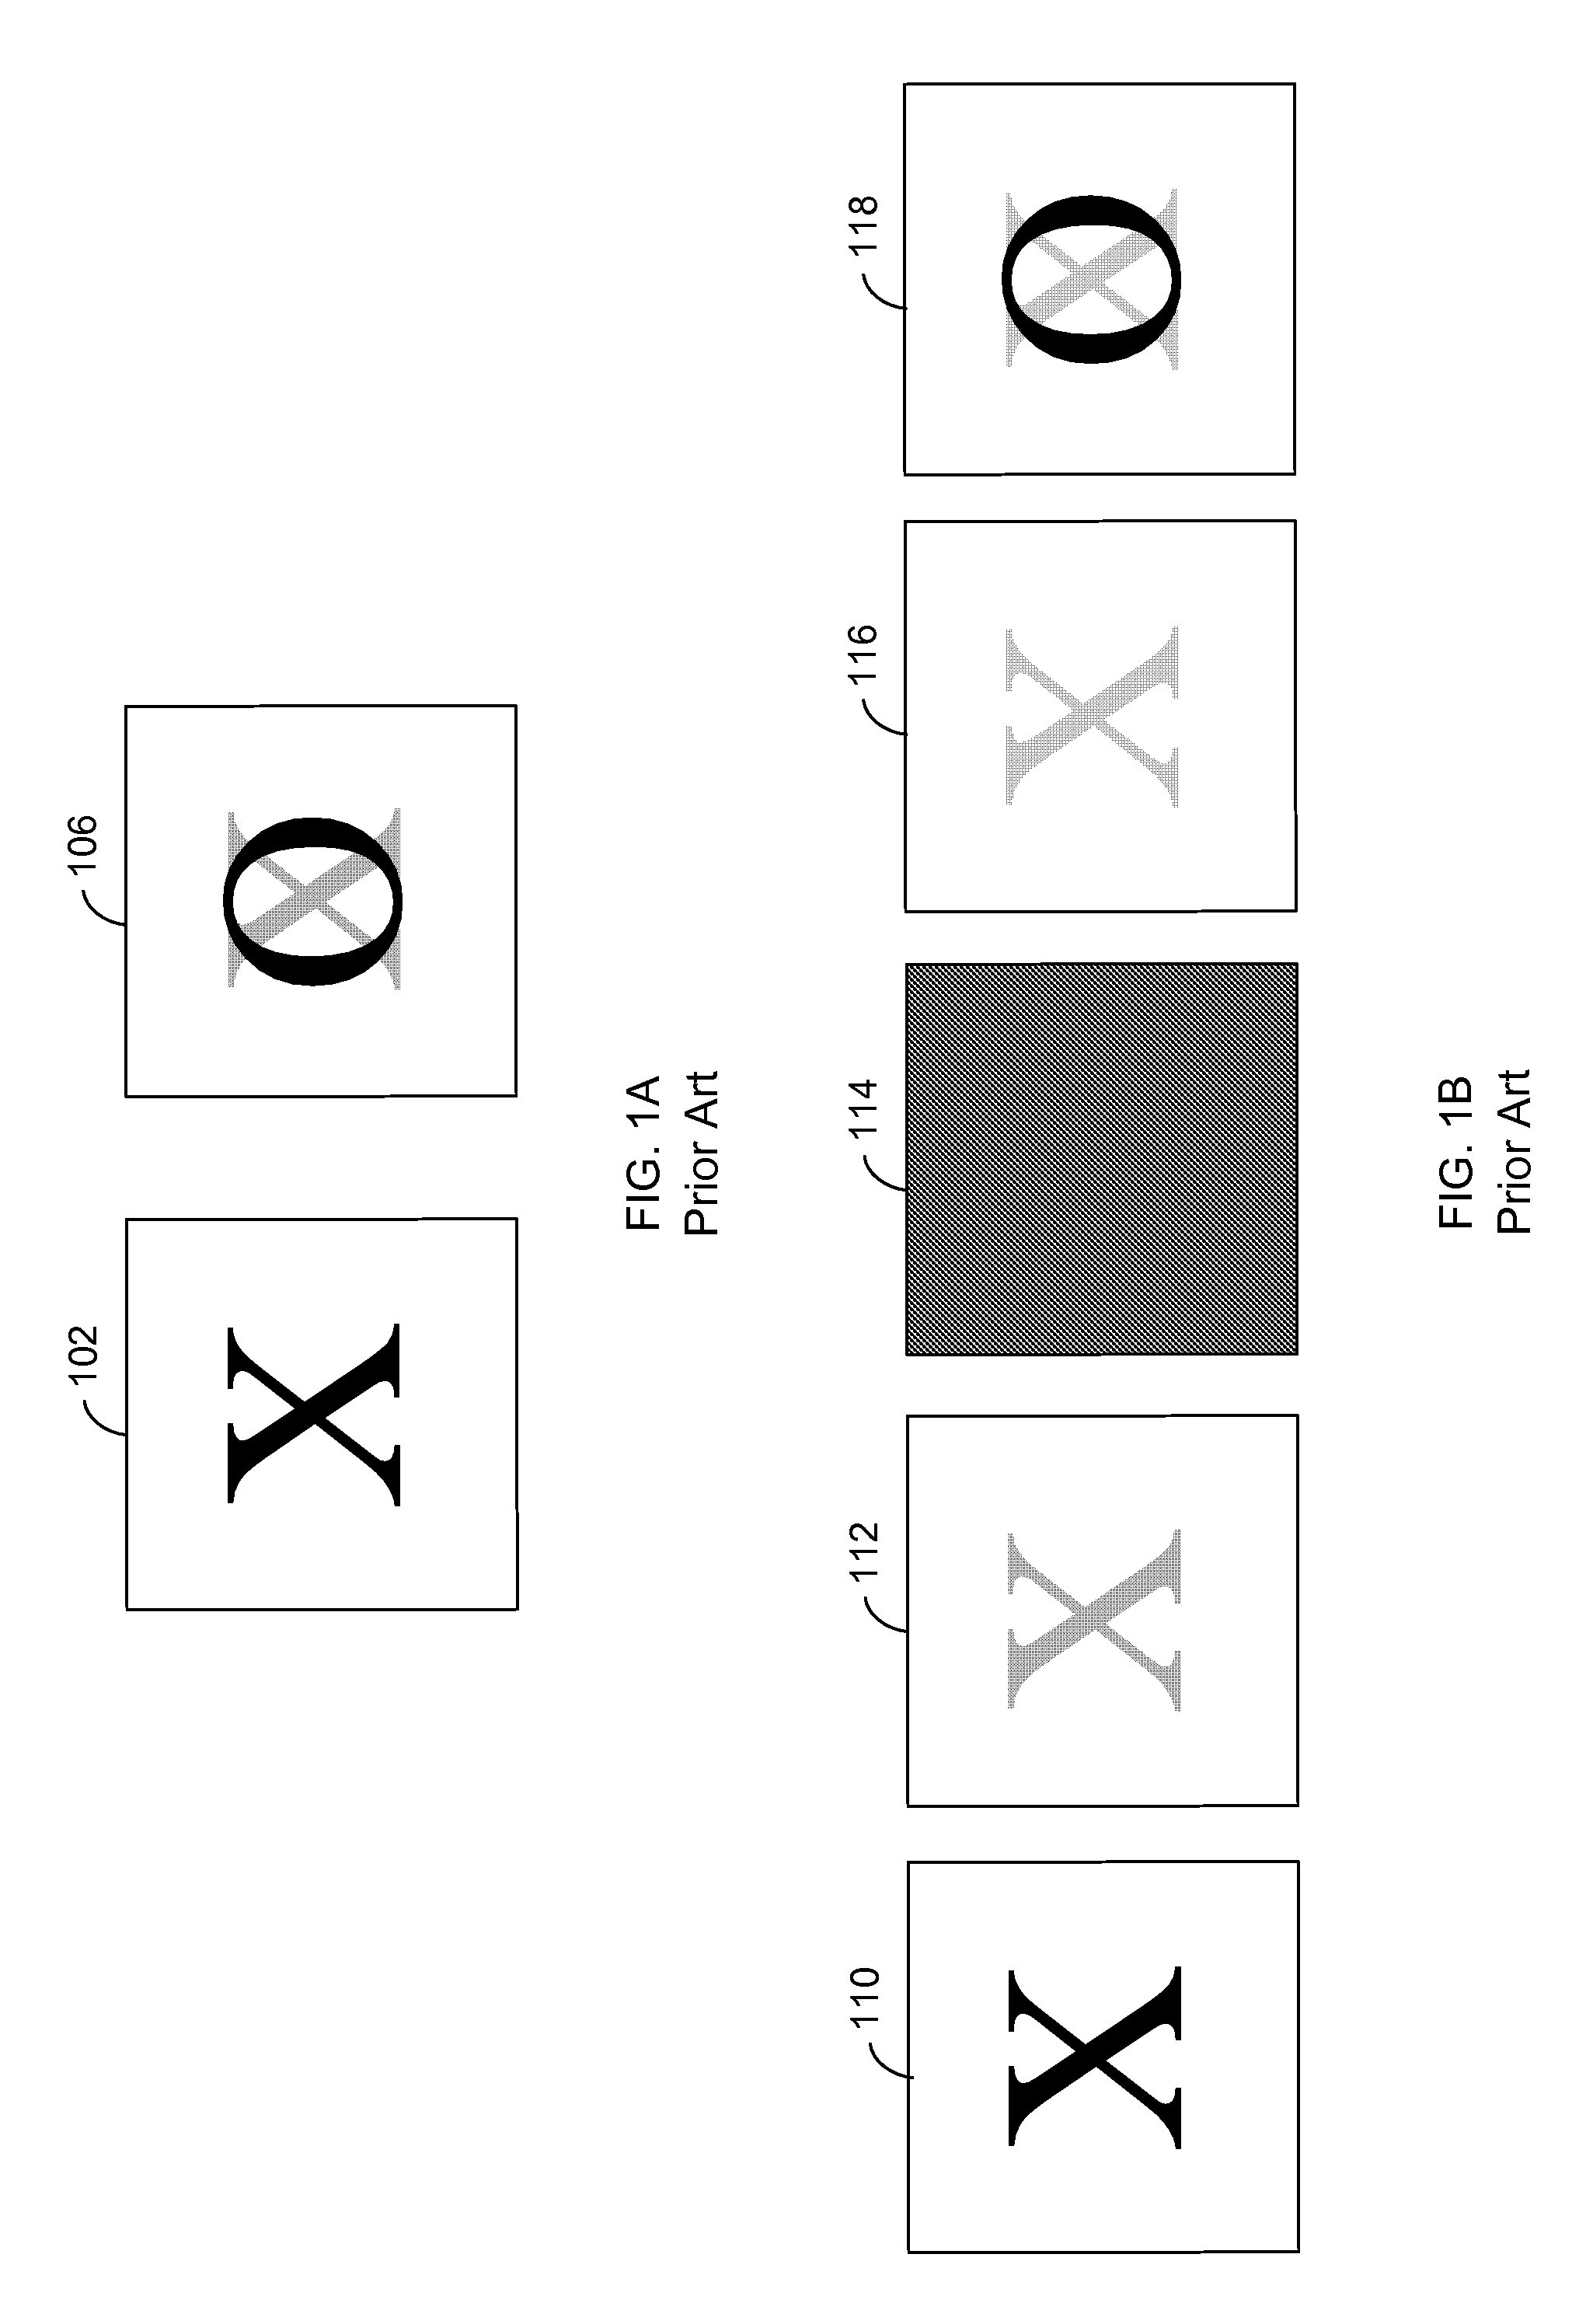 Spatially Masked Update for Electronic Paper Displays